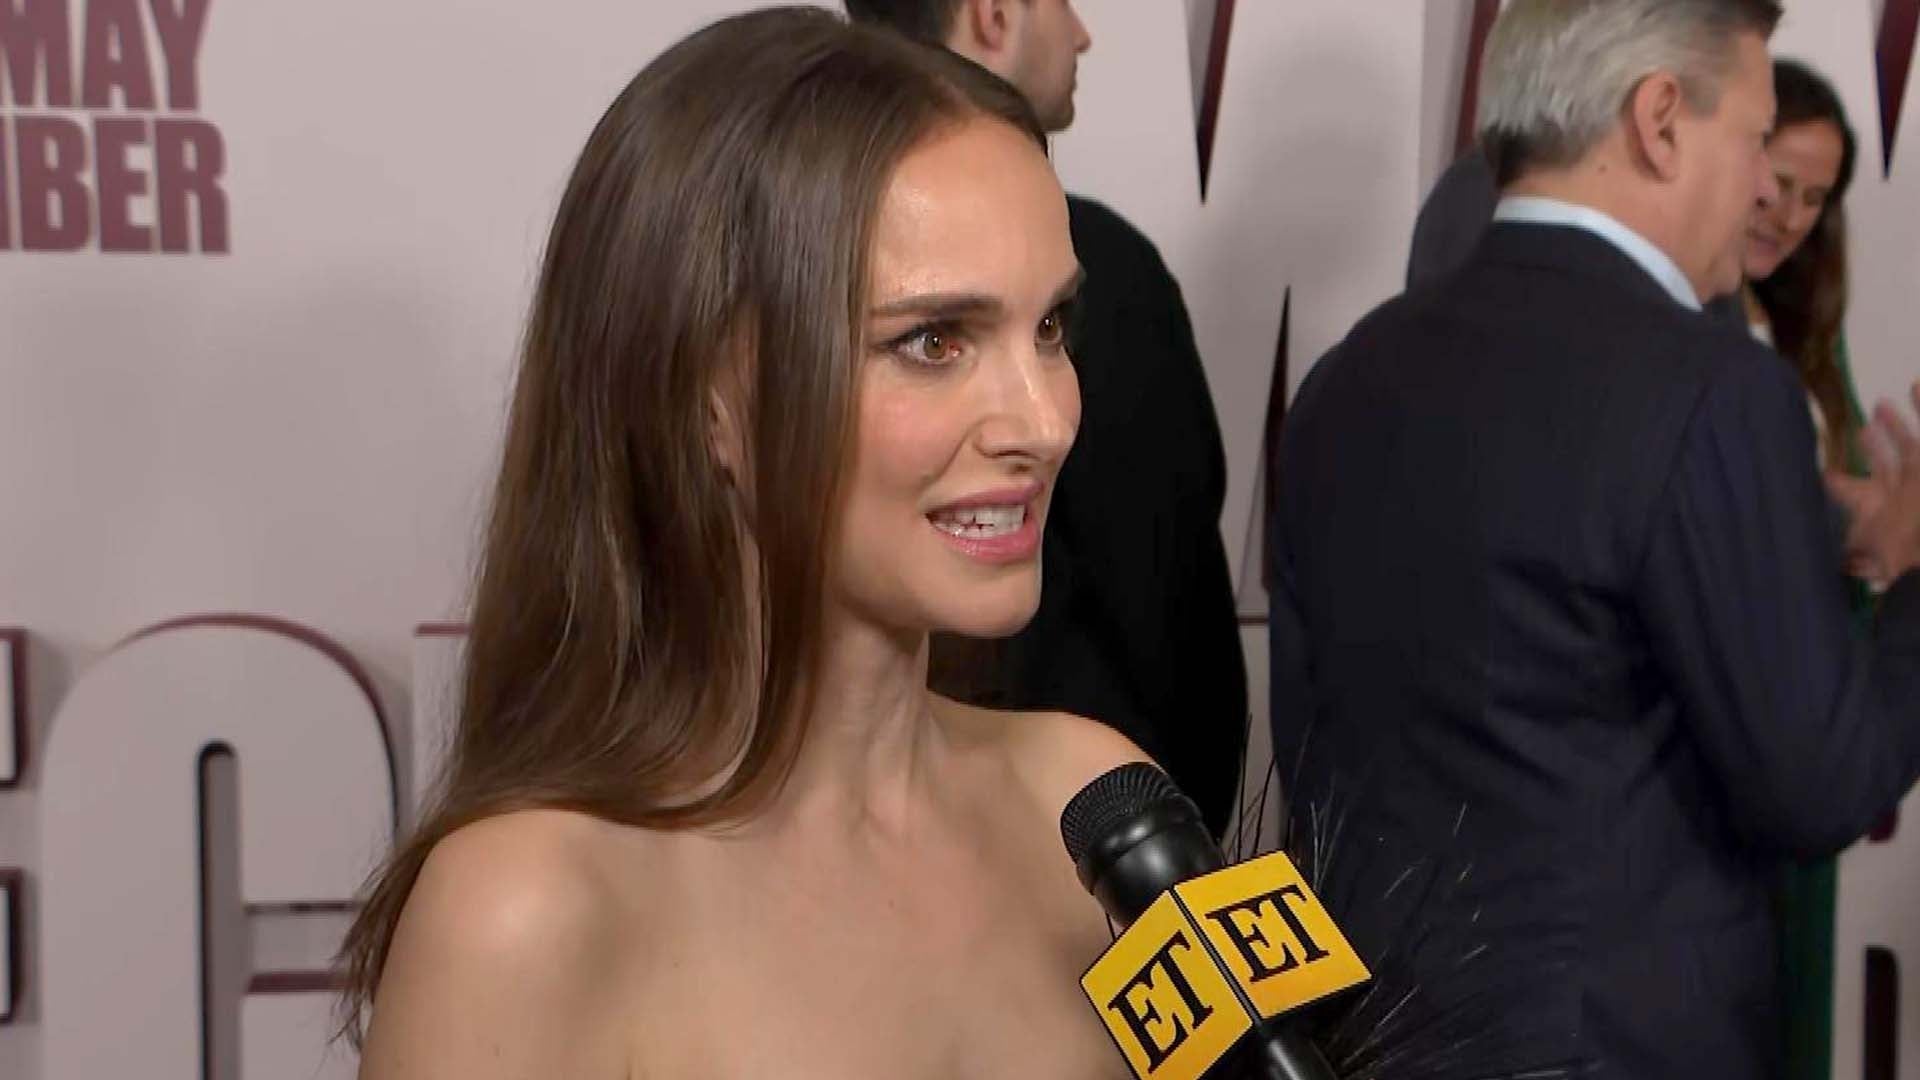 'May December': Natalie Portman Reacts to Mary Kay Latourneau Scandal Comparison (Exclusive)